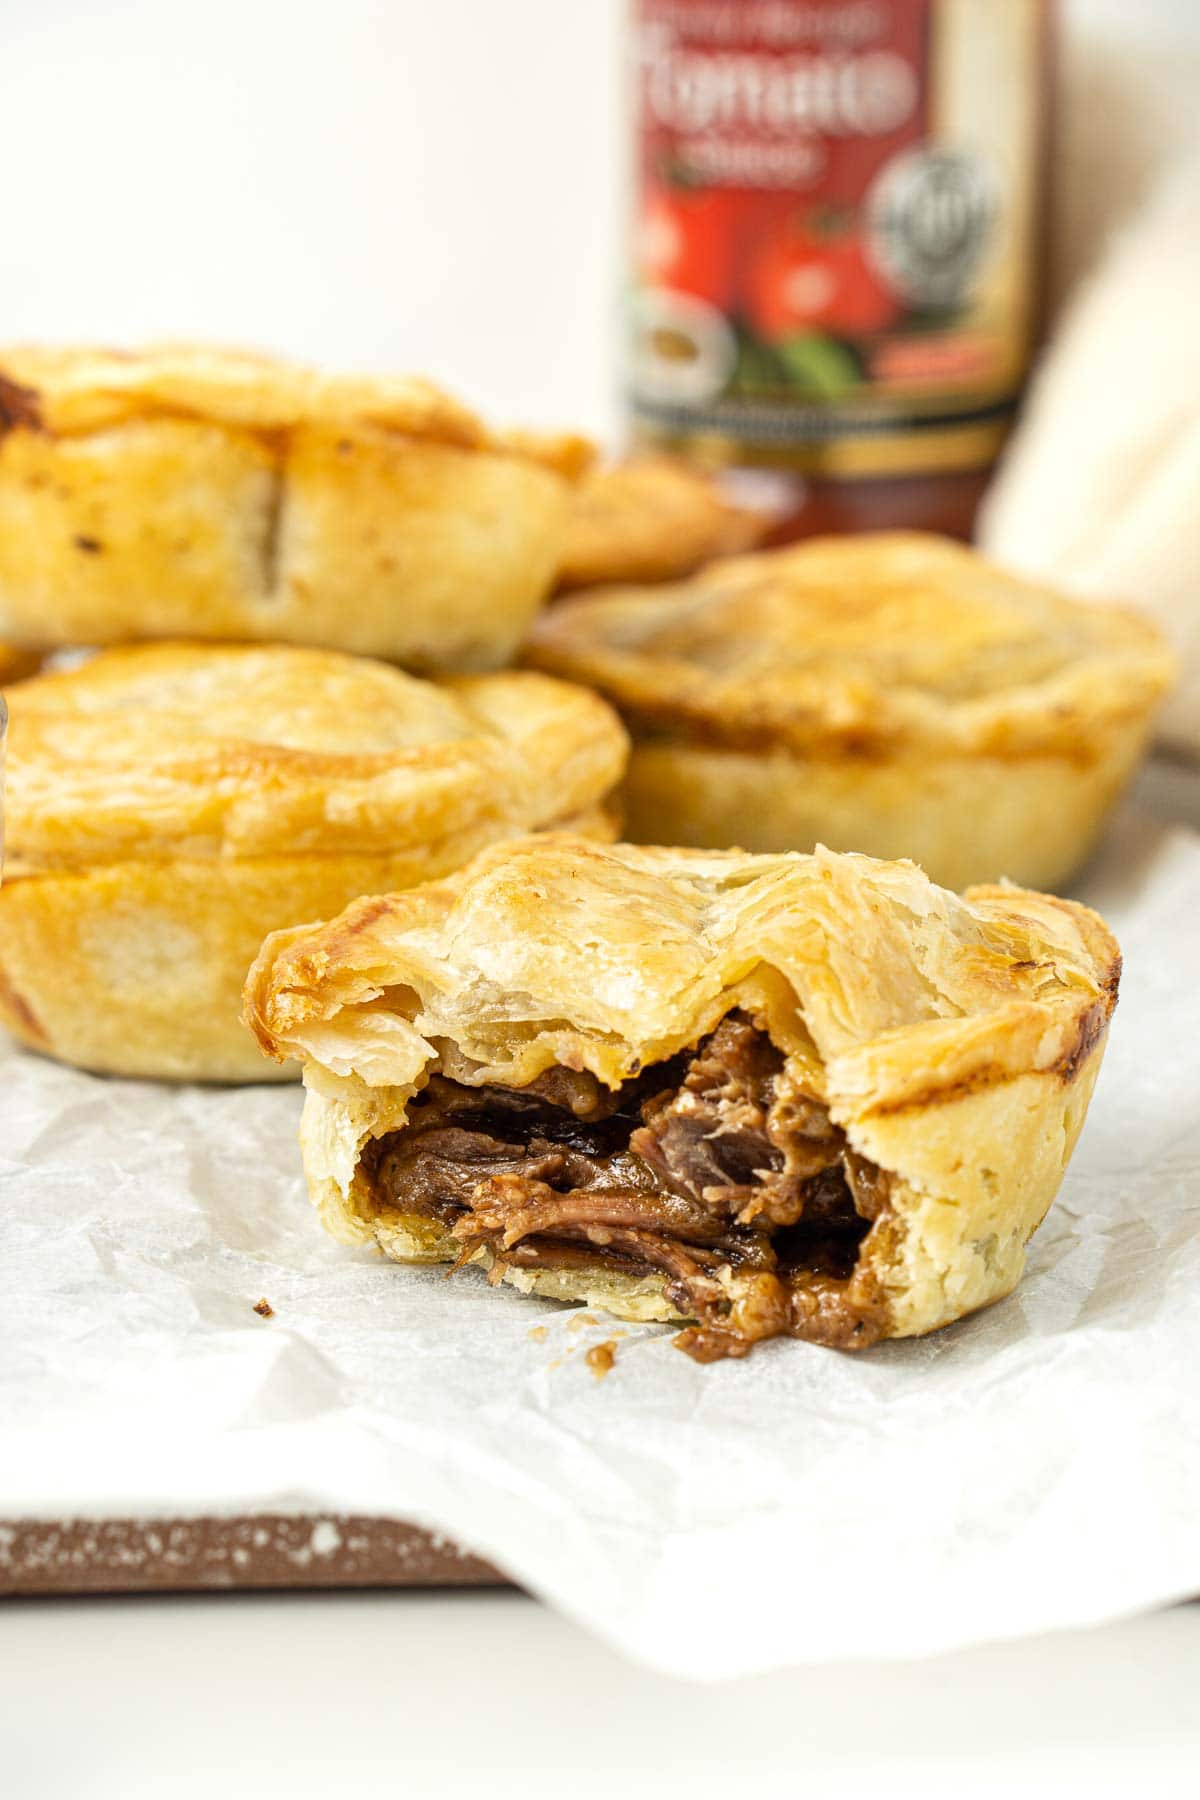 Mini beef pie on a tray with a bite taken out of it revealing the chunky steak filling.